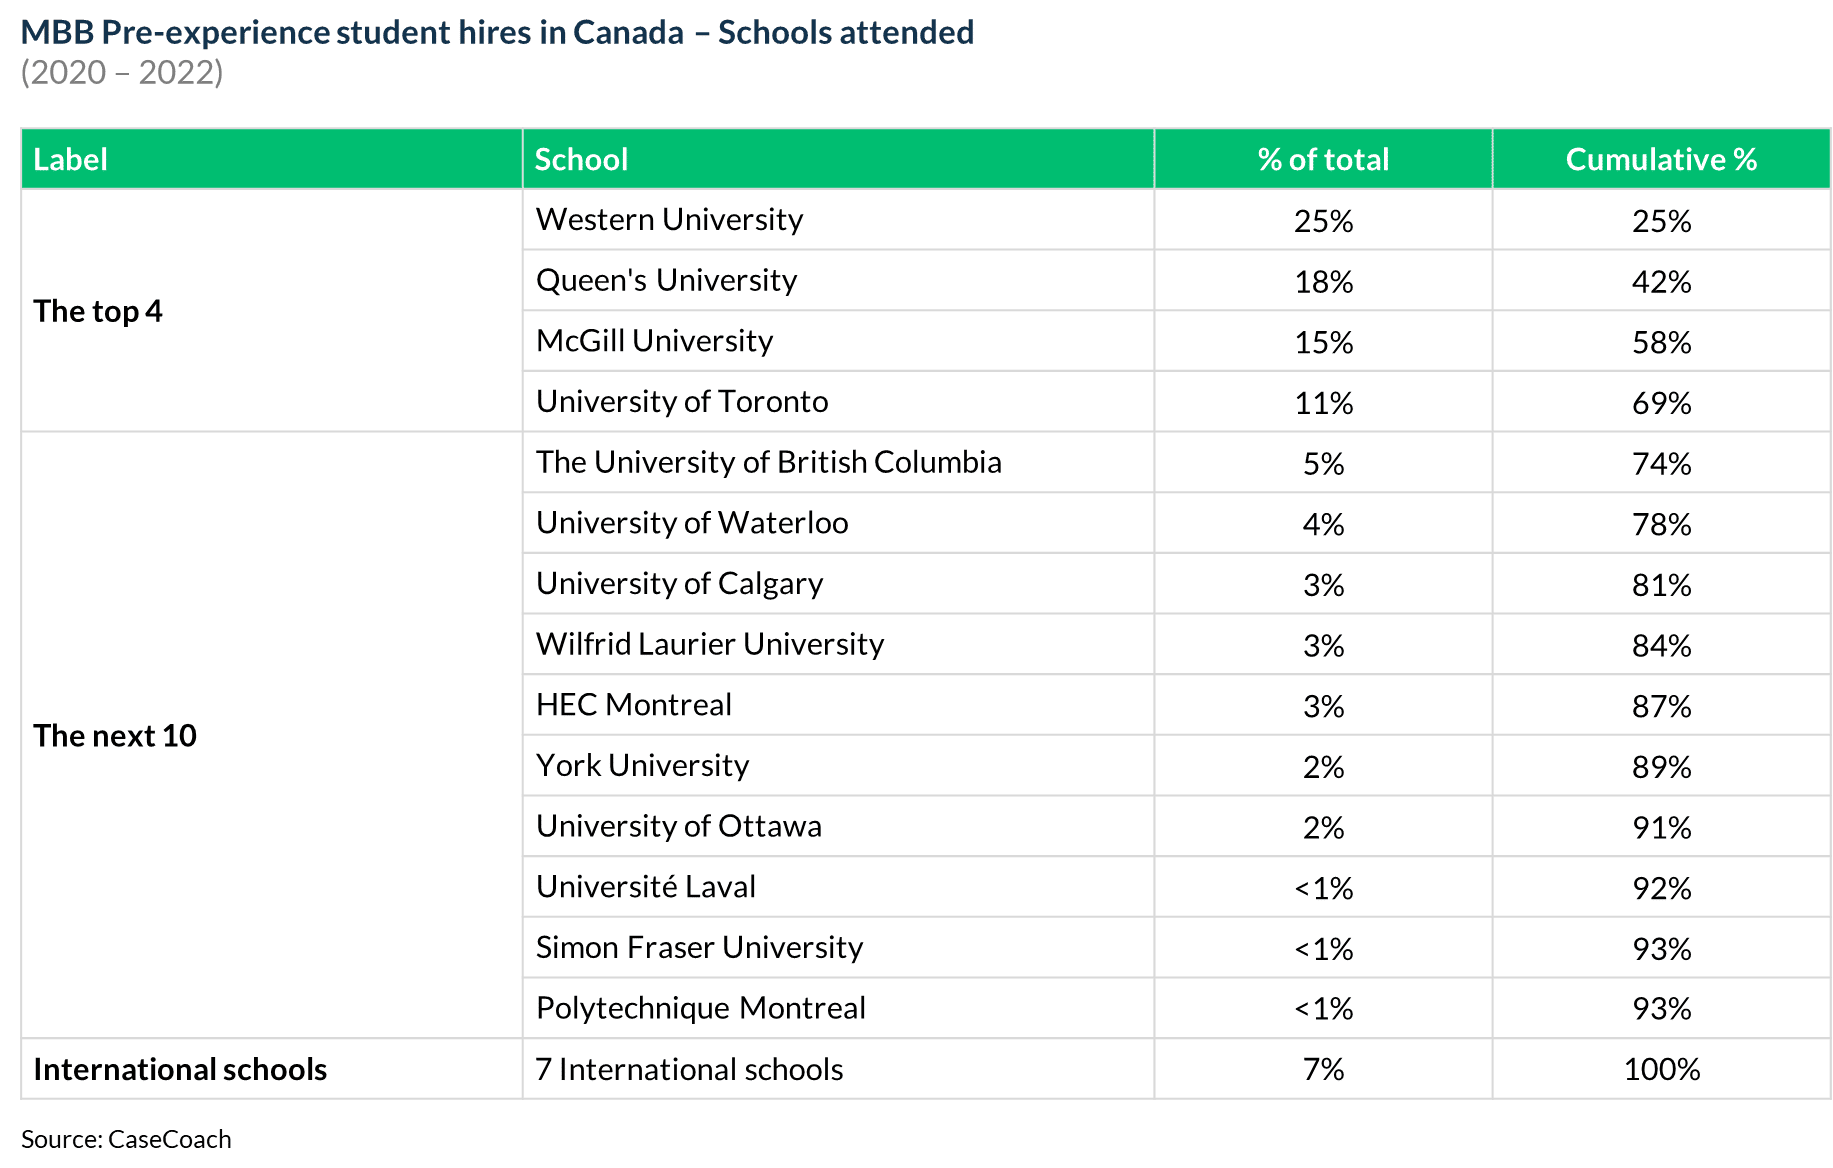 Schools attended by McKinsey, BCG, and Bain's pre-experience student hires in Canada